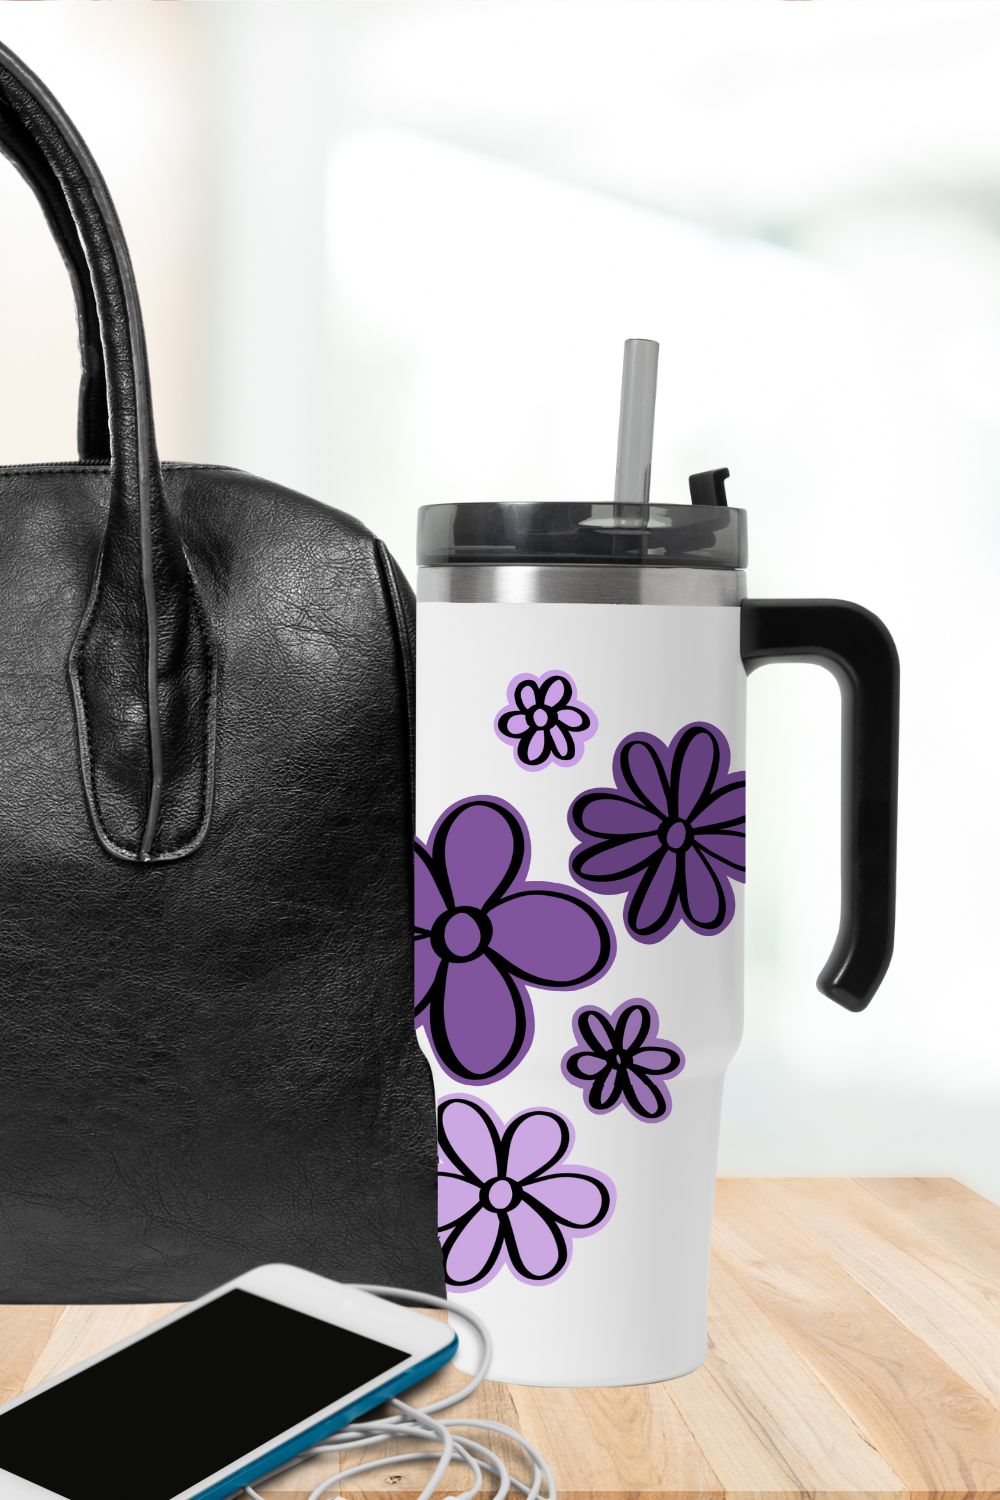 2 Layer cut file of 5 hand drawn flowers (free), shown cut from permanent vinyl on a tumbler with a purple background layer and black flower outline.